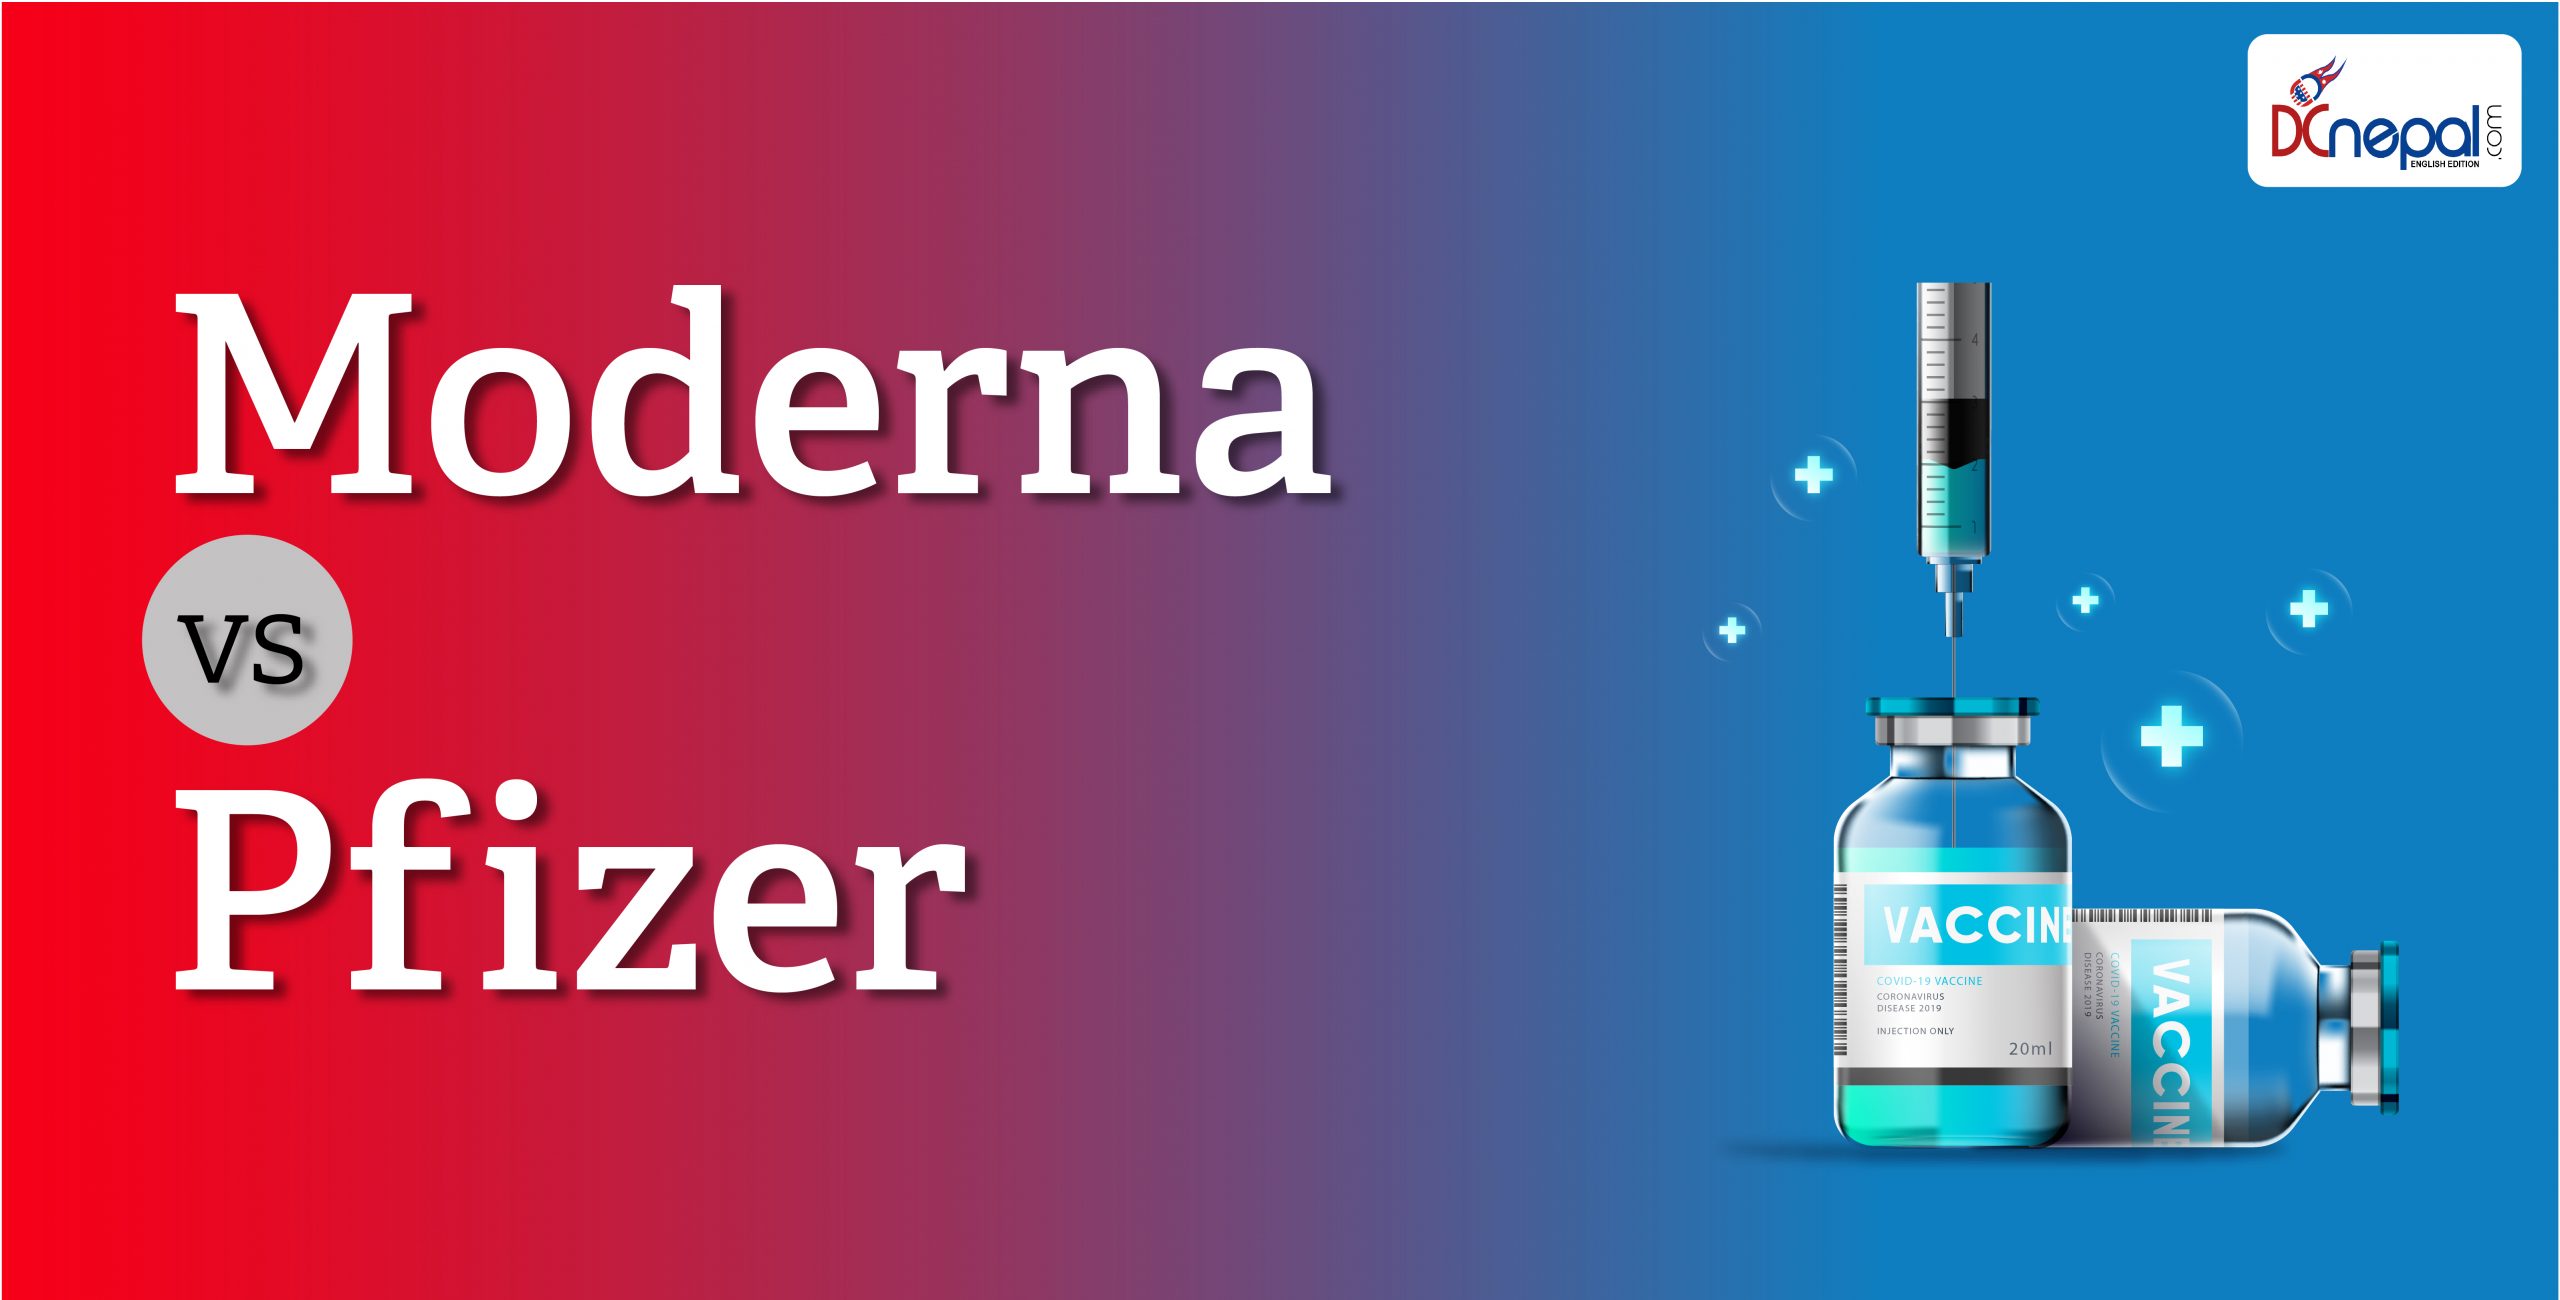 Here is why Moderna is better than Pfizer vaccine DCnepal